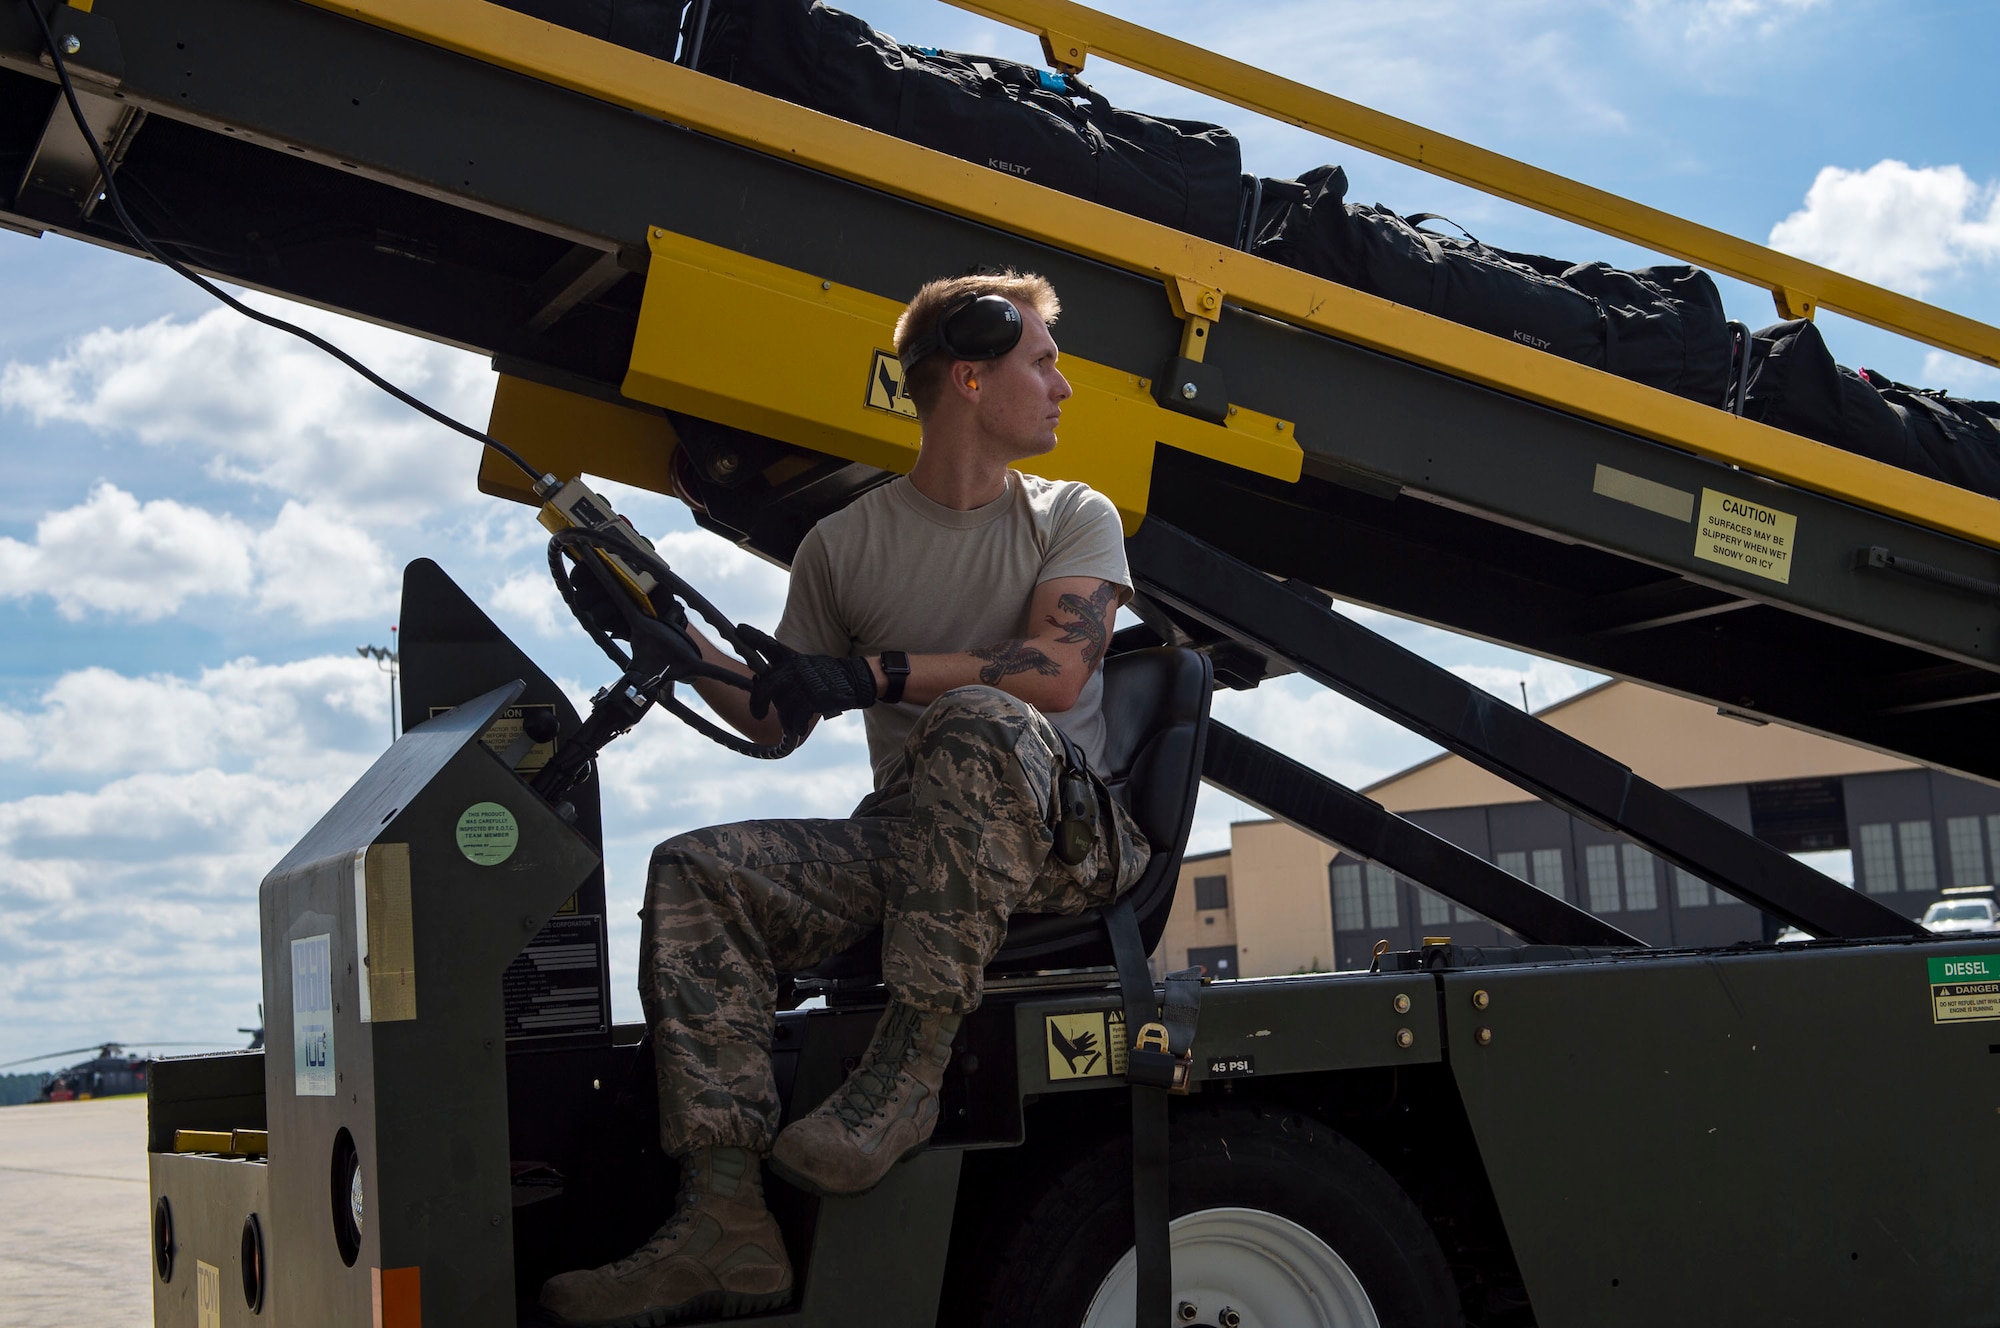 Senior Airman Zachary Darling, 23d Logistics Readiness Squadron air transportation specialist, runs a conveyor belt, 0ct. 24, 2018, at Moody Air Force Base, Ga. The 822d, 823d and 824th Base Defense Squadrons (BDS) provide high-risk force protection and integrated base defense for expeditionary air forces. Airmen from the 823d BDS just returned home from conducting relief-in-place in the United States Africa Command theater while Airmen from the 824th BDS took their place. (U.S. Air Force photo by Senior Airman Janiqua P. Robinson)